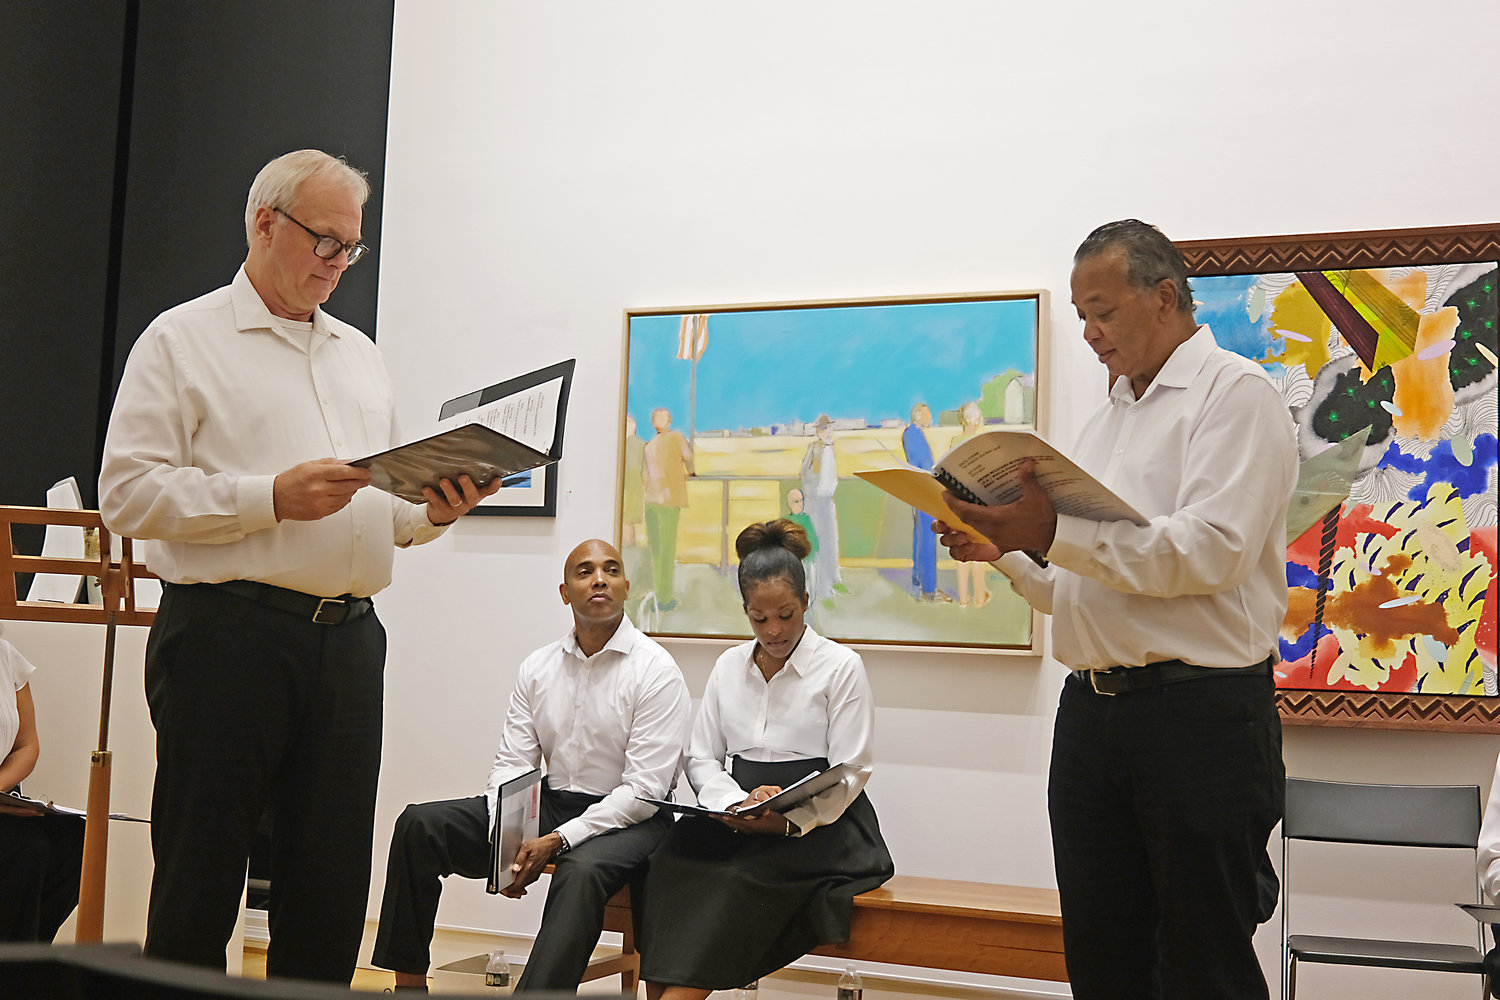 Actors play out a scene in Samuel Harps' production, which contained selected scenes exploring events over the last seven years of Paul Cuffe's life.